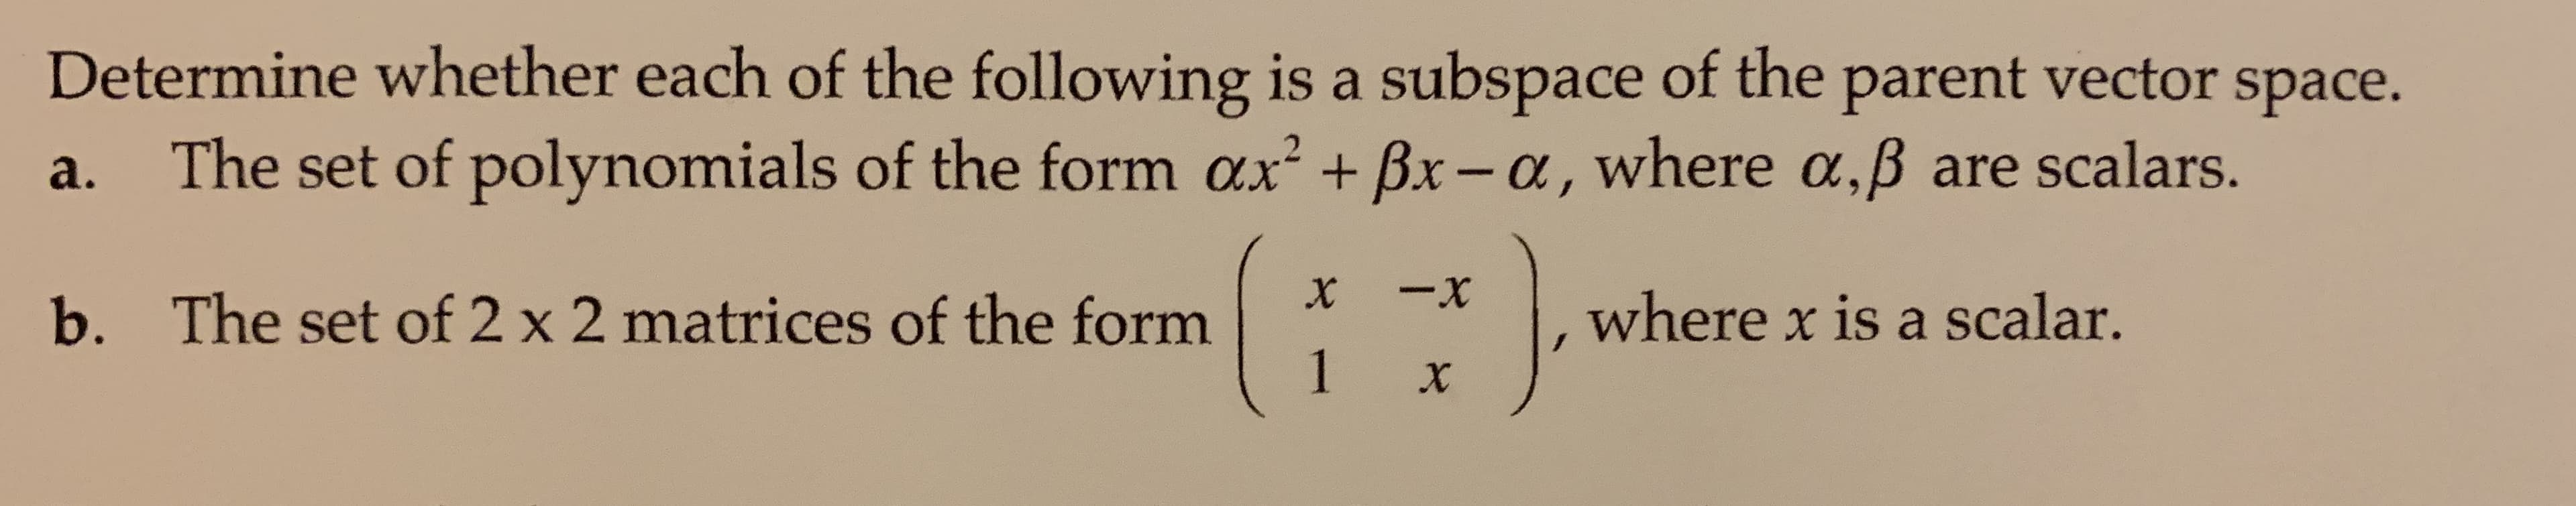 Determine whether each of the following is a subspace of the parent vector space.
The set of polynomials of the form ax + Bx-a, where a,B are scalars.
2
а.
-x
X
The set of 2 x 2 matrices of the form
1
where x is a scalar.
b.
X
